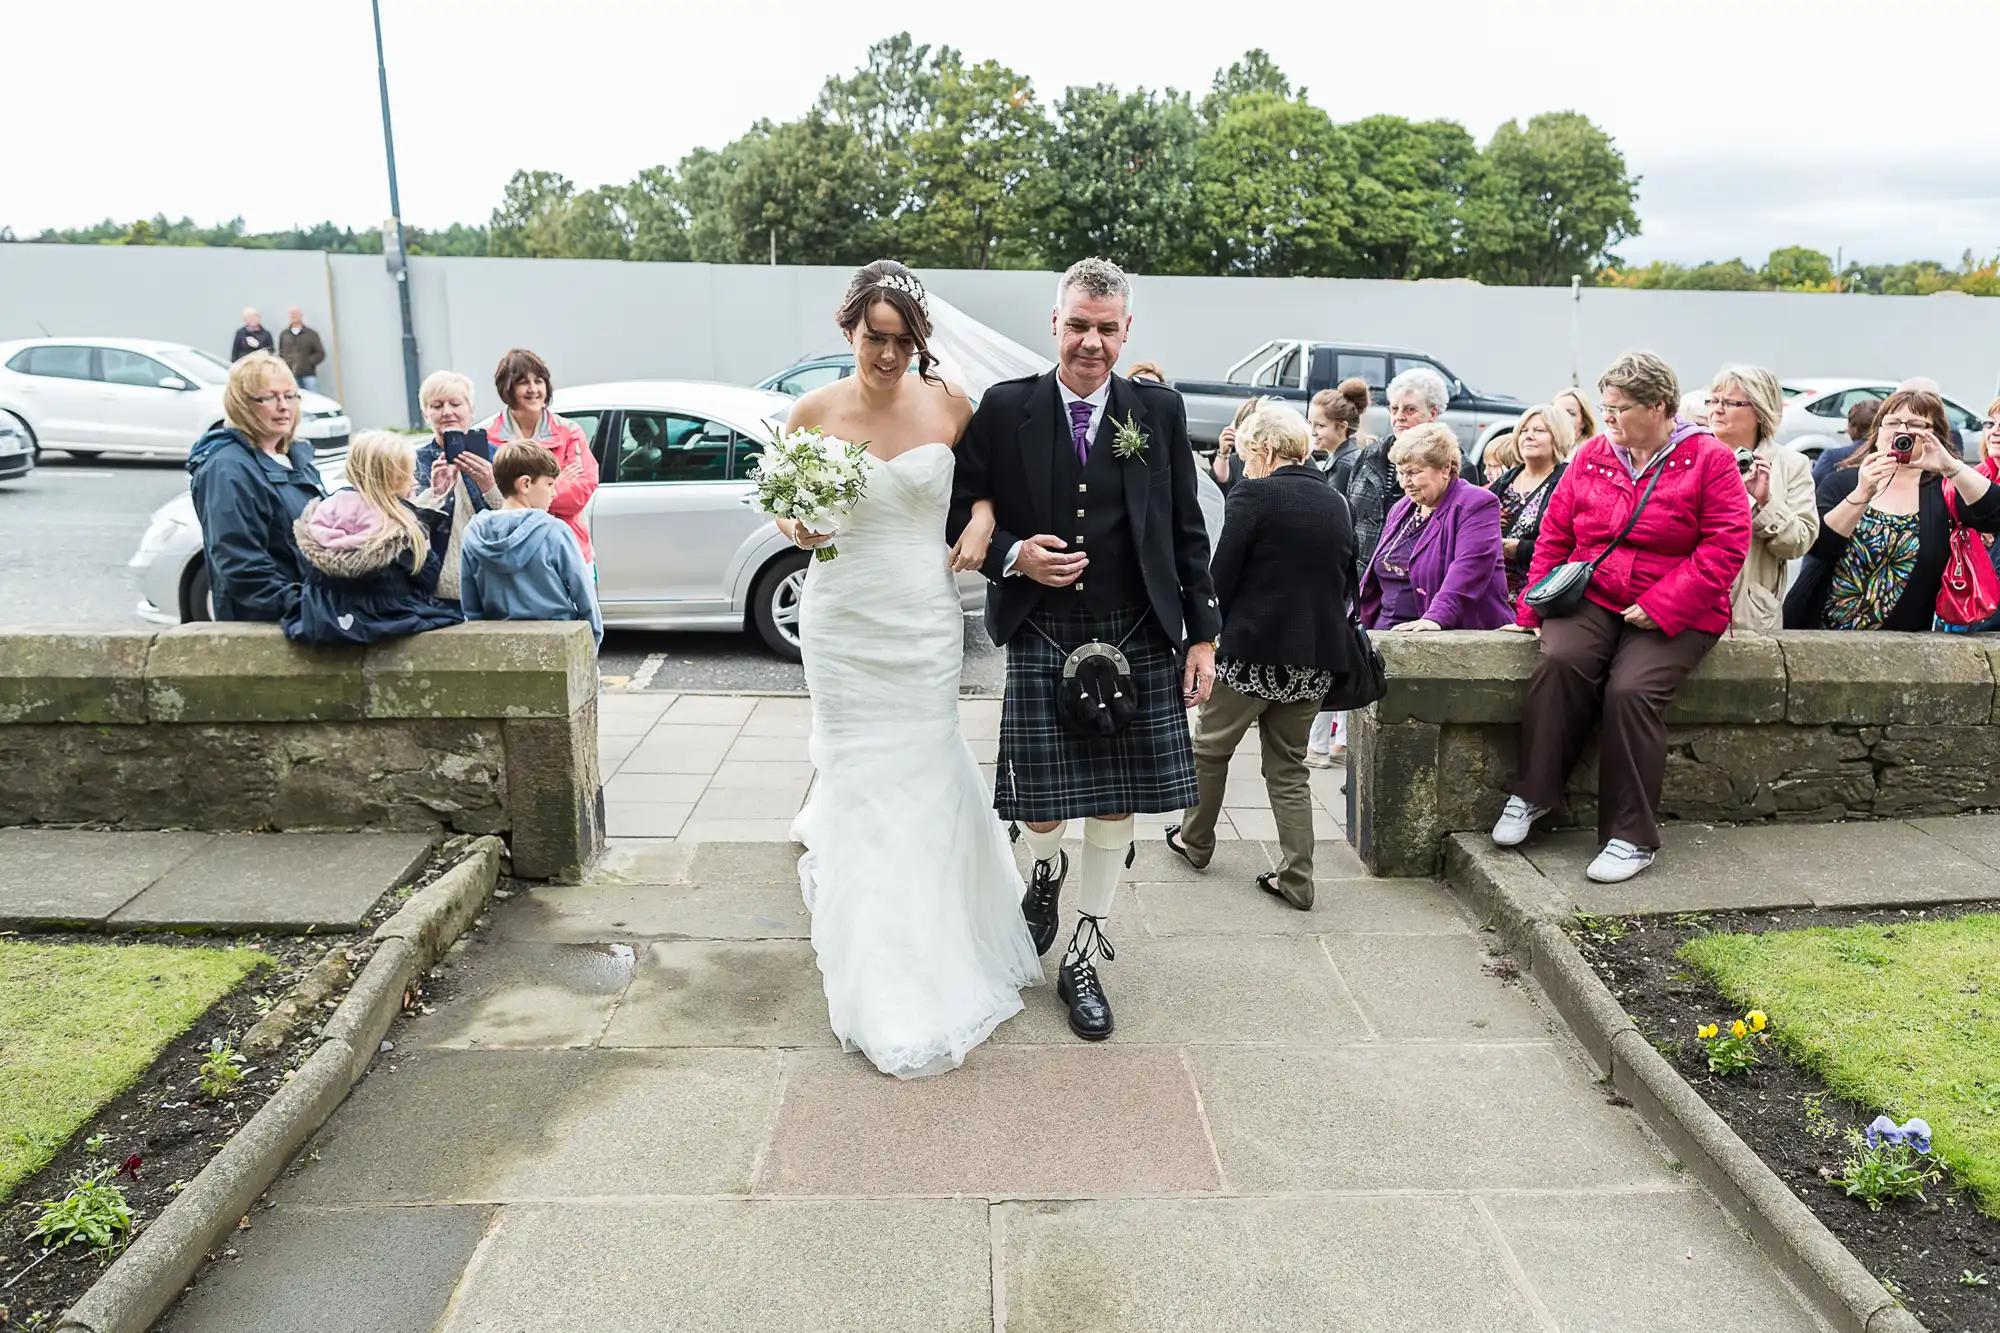 A bride in a white dress and a groom in a kilt walk hand in hand, surrounded by smiling onlookers, in an outdoor setting with parked cars in the background.